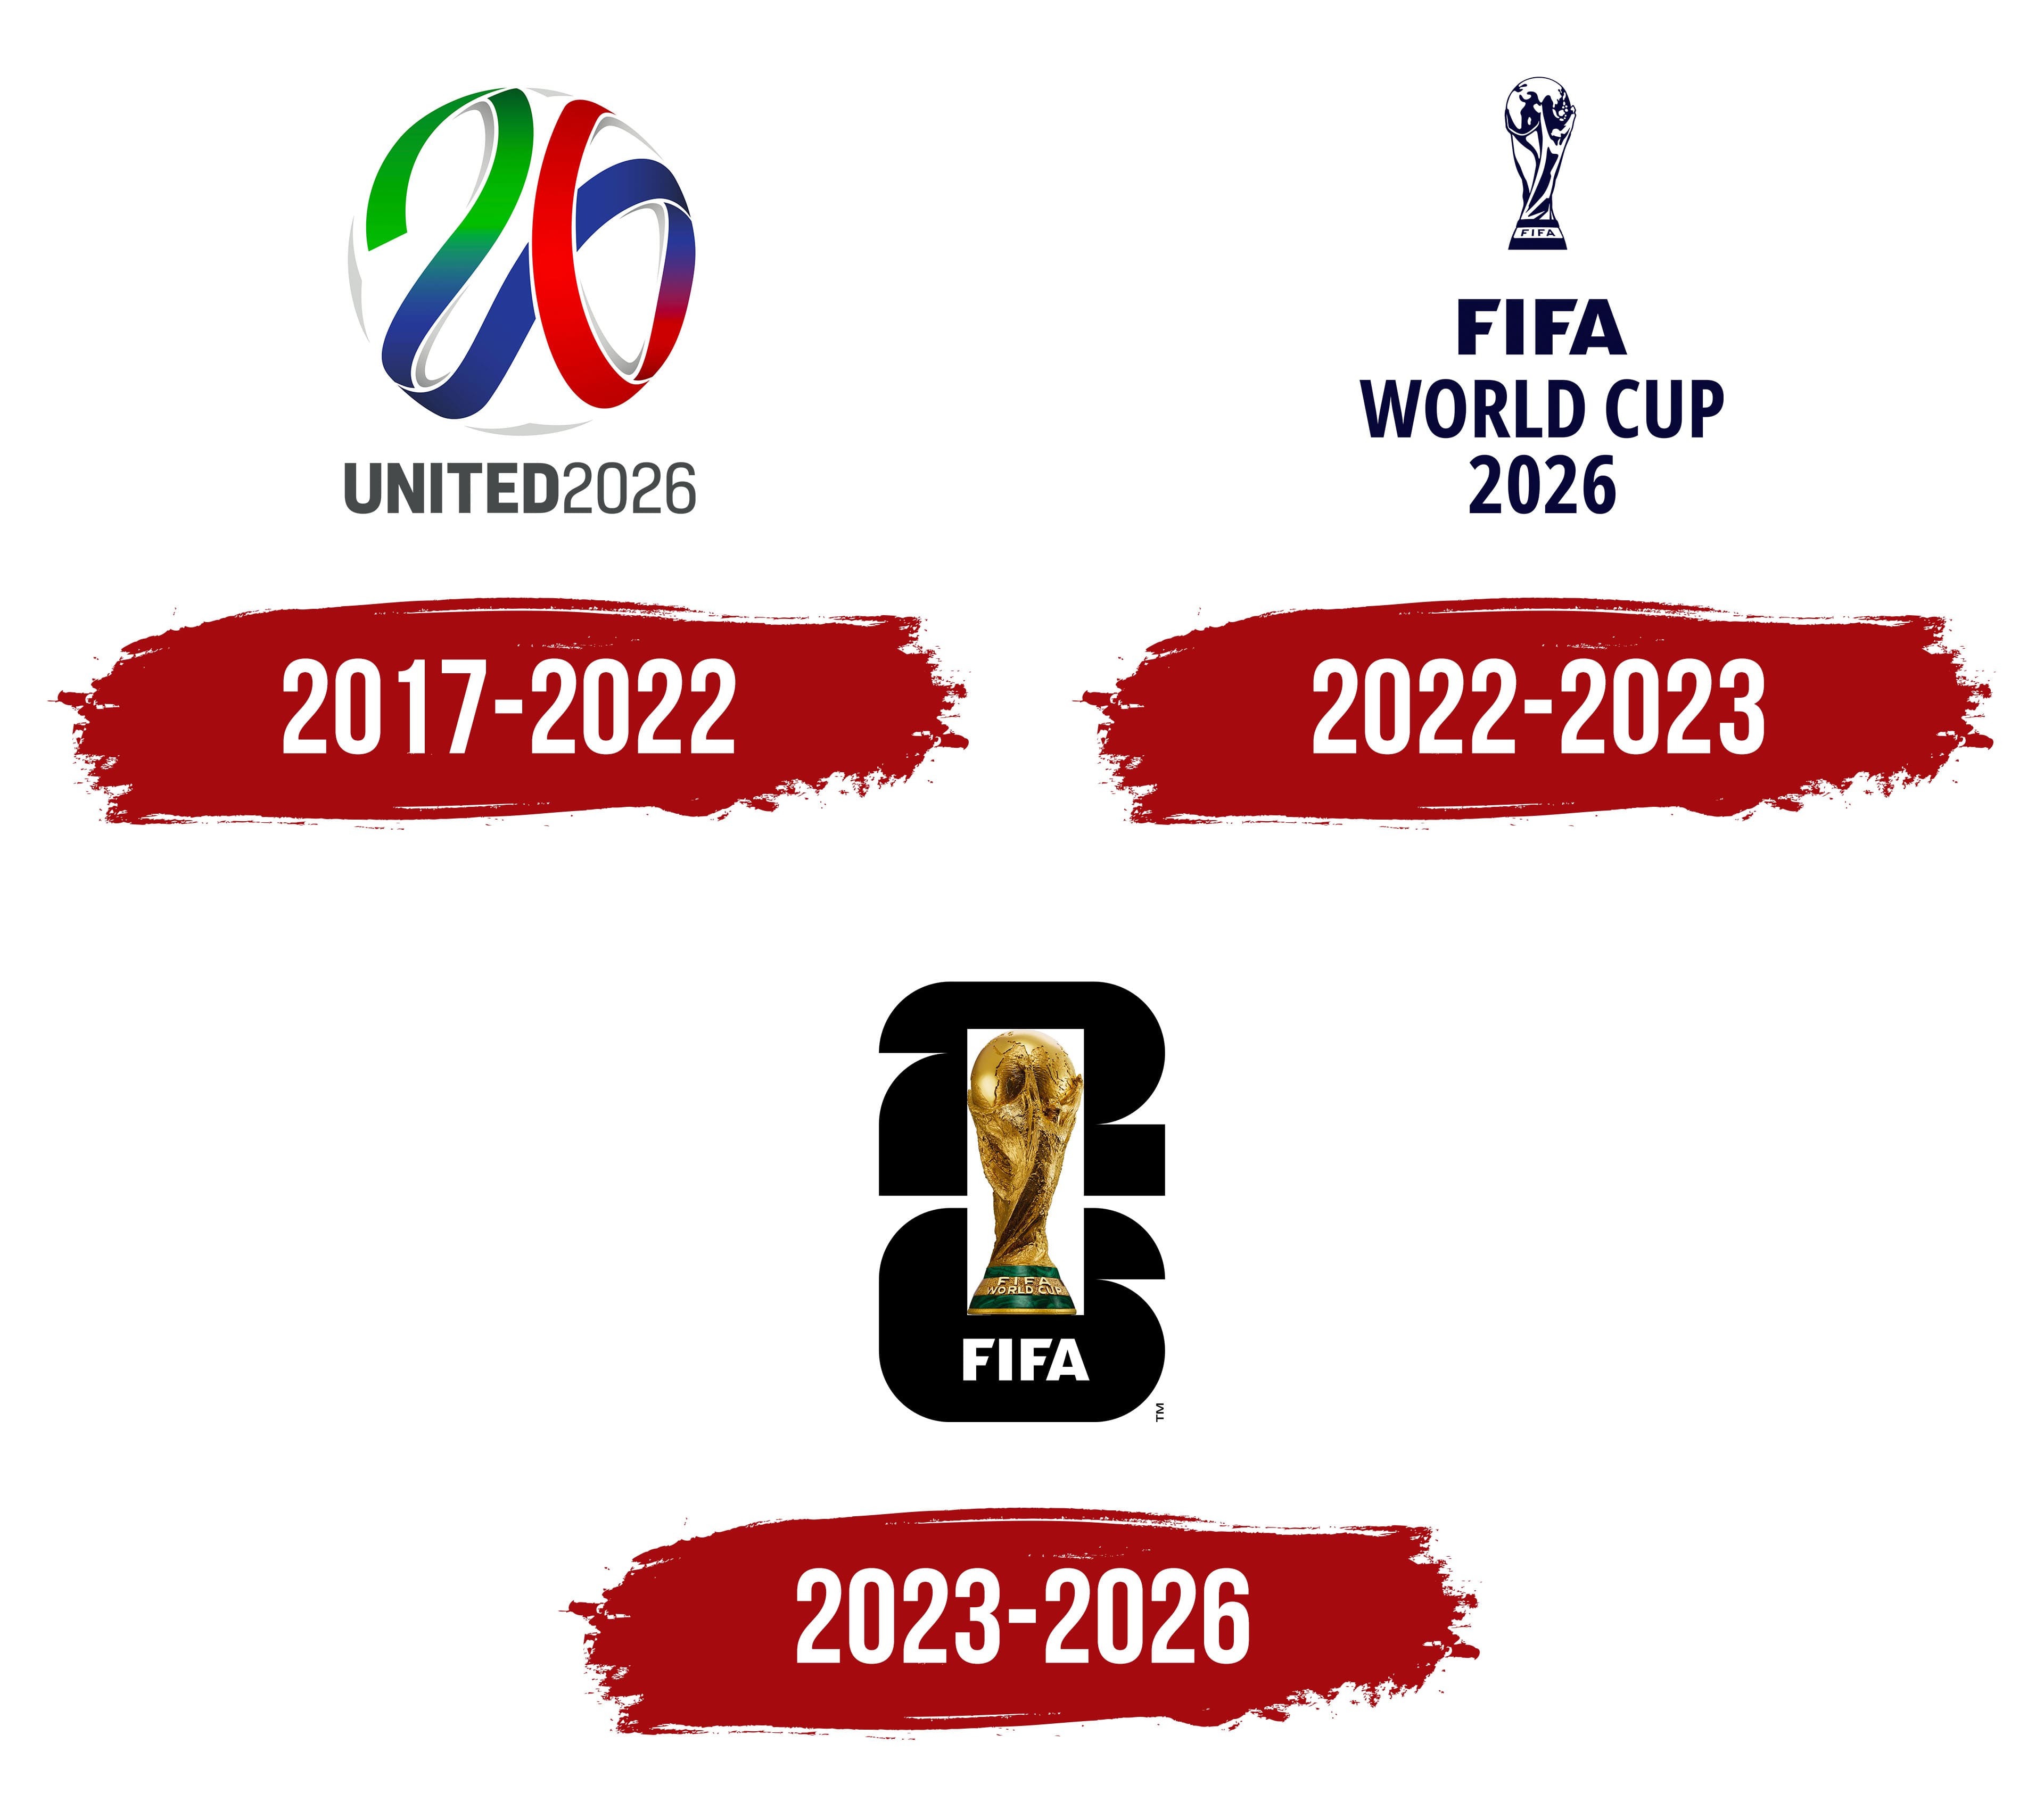 How to buy FIFA World Cup 2026 tickets